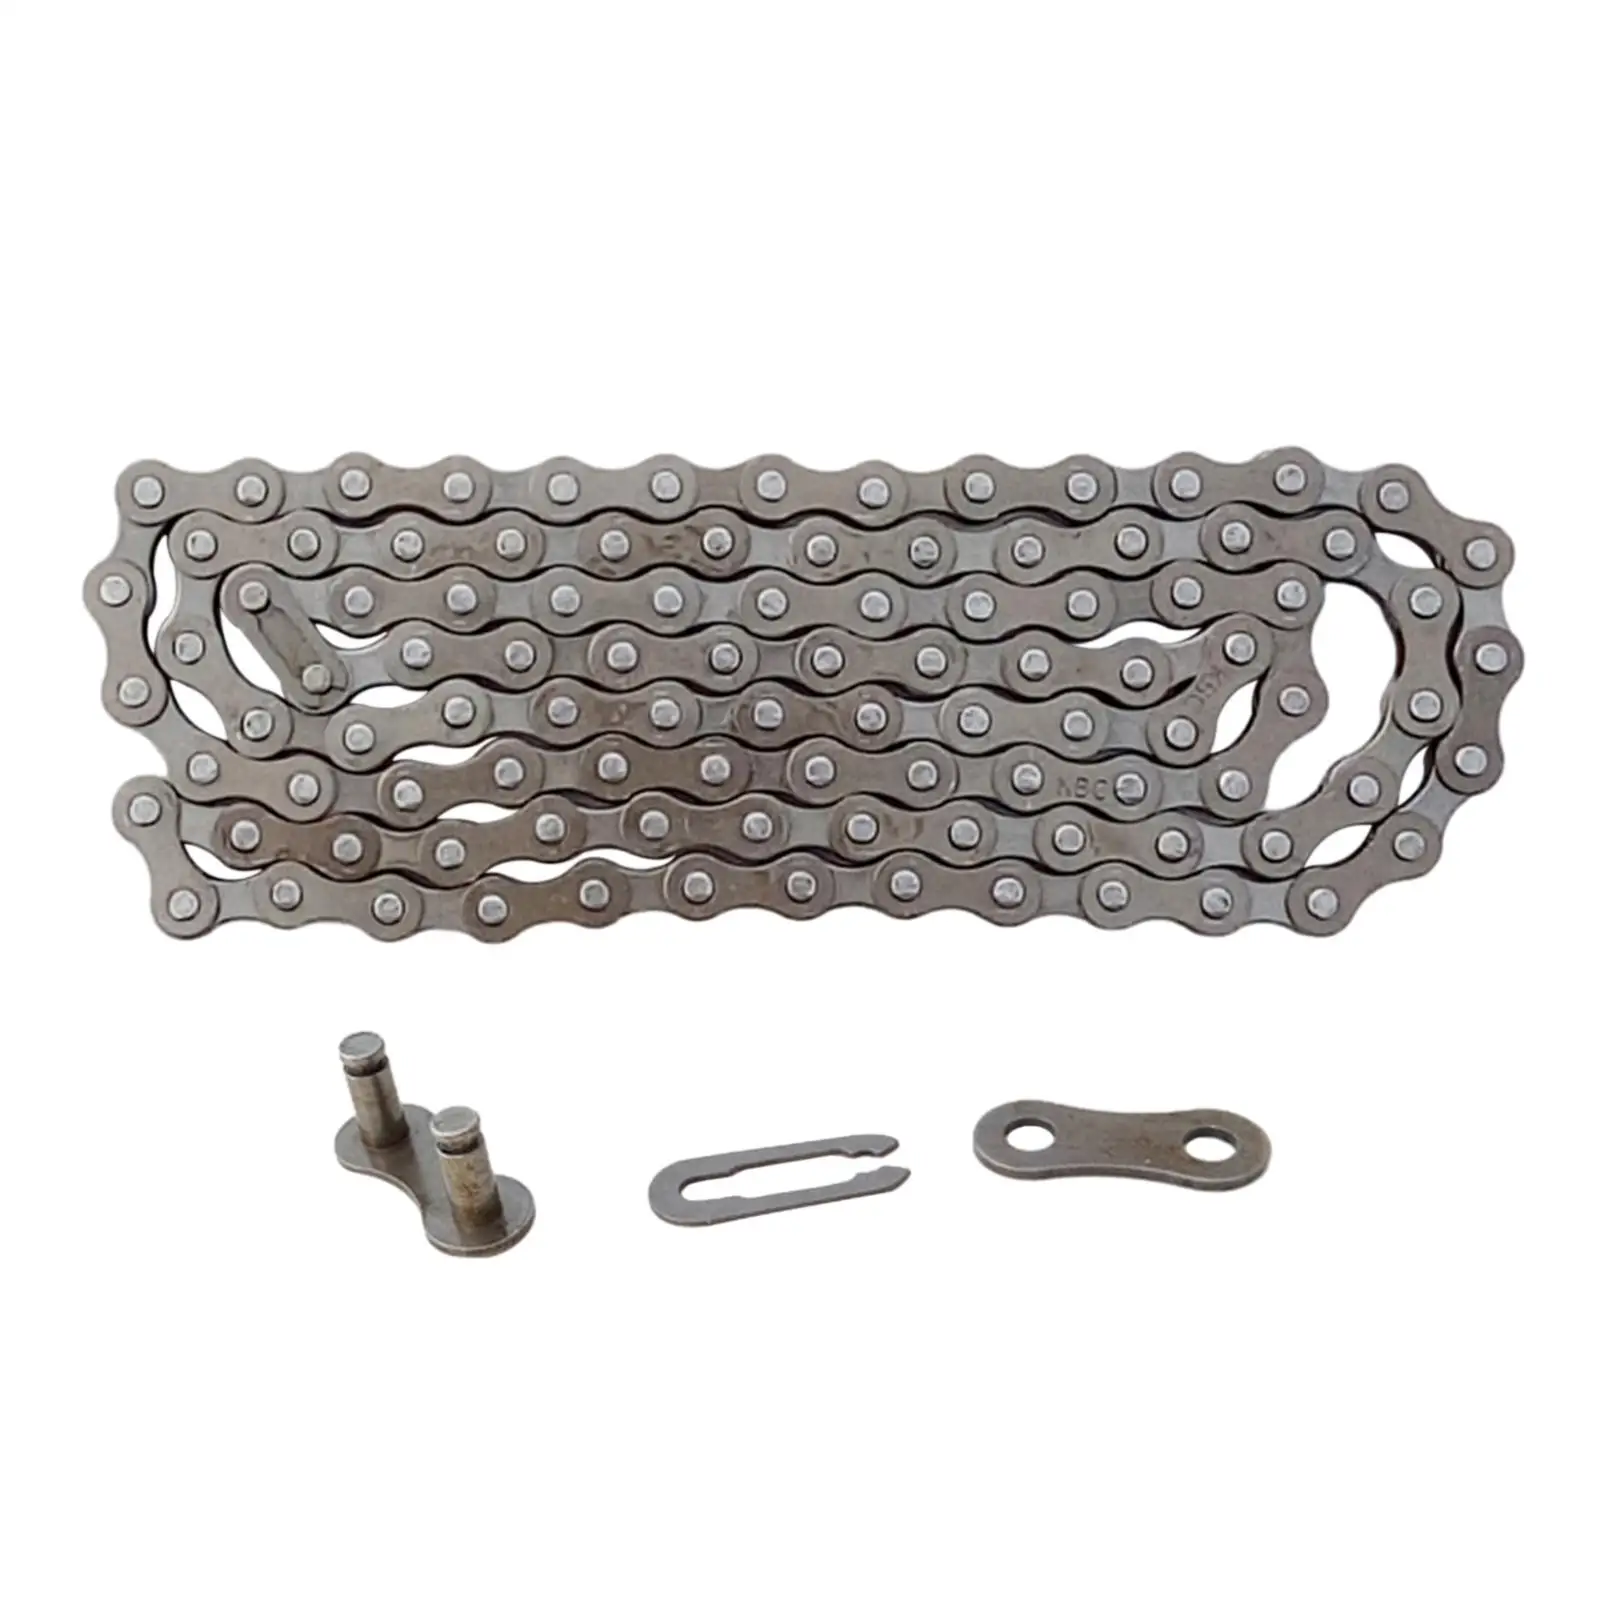 114x Bicycle Links Chain Connector Bike Chain Master Links for 6 7 8/9/10/Speeds Road Mountain Bike Cycling Repair Spare Part